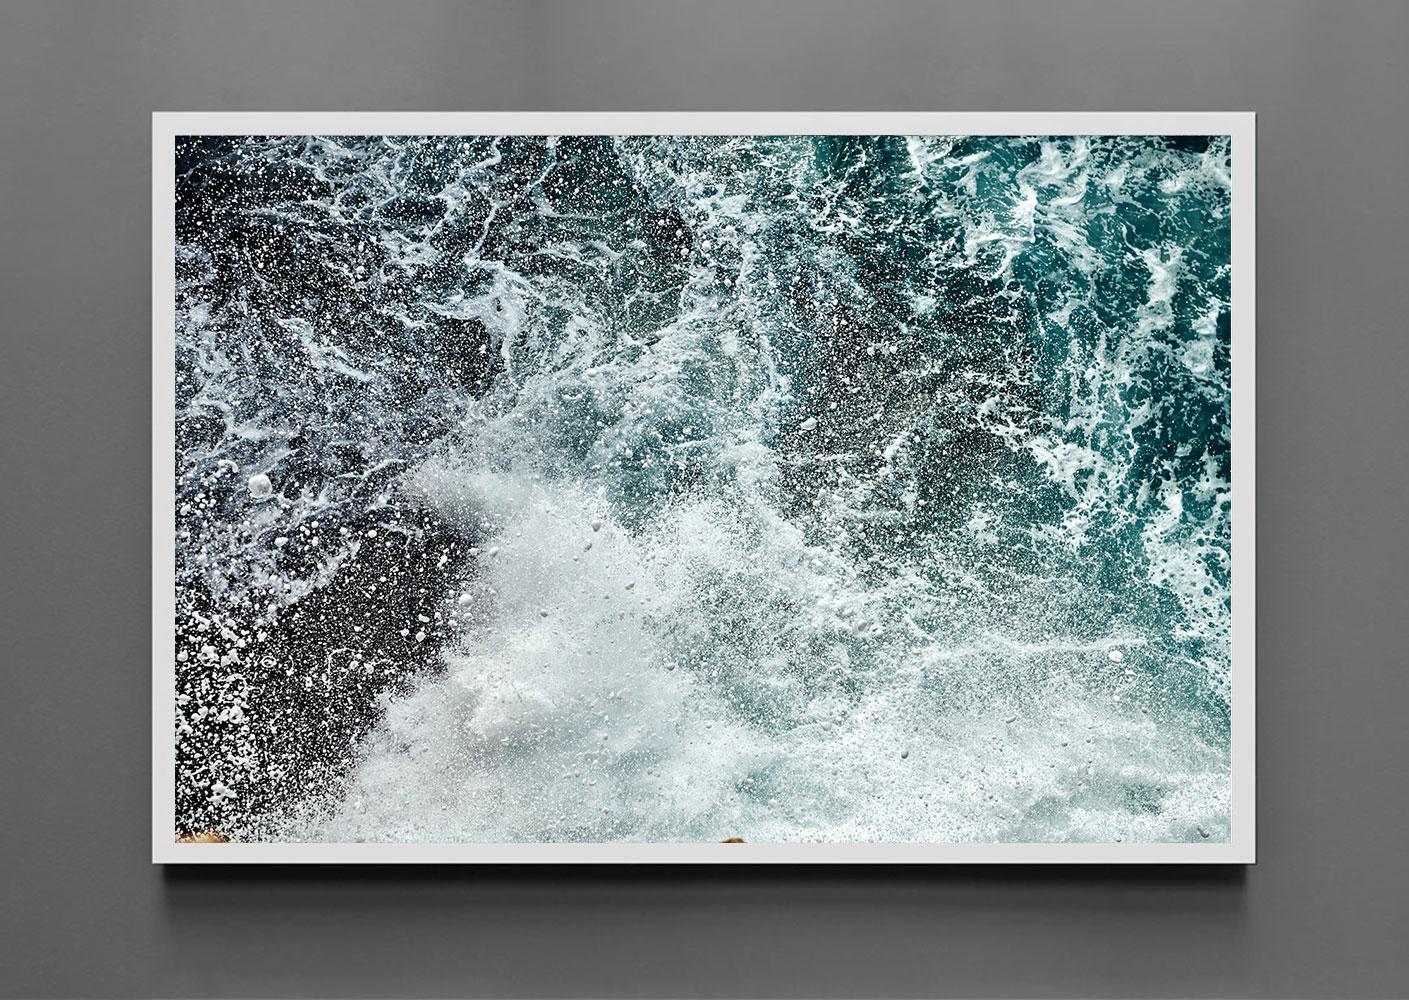 Mare 409 - Seascape photograph - Photograph by Alessandro Puccinelli